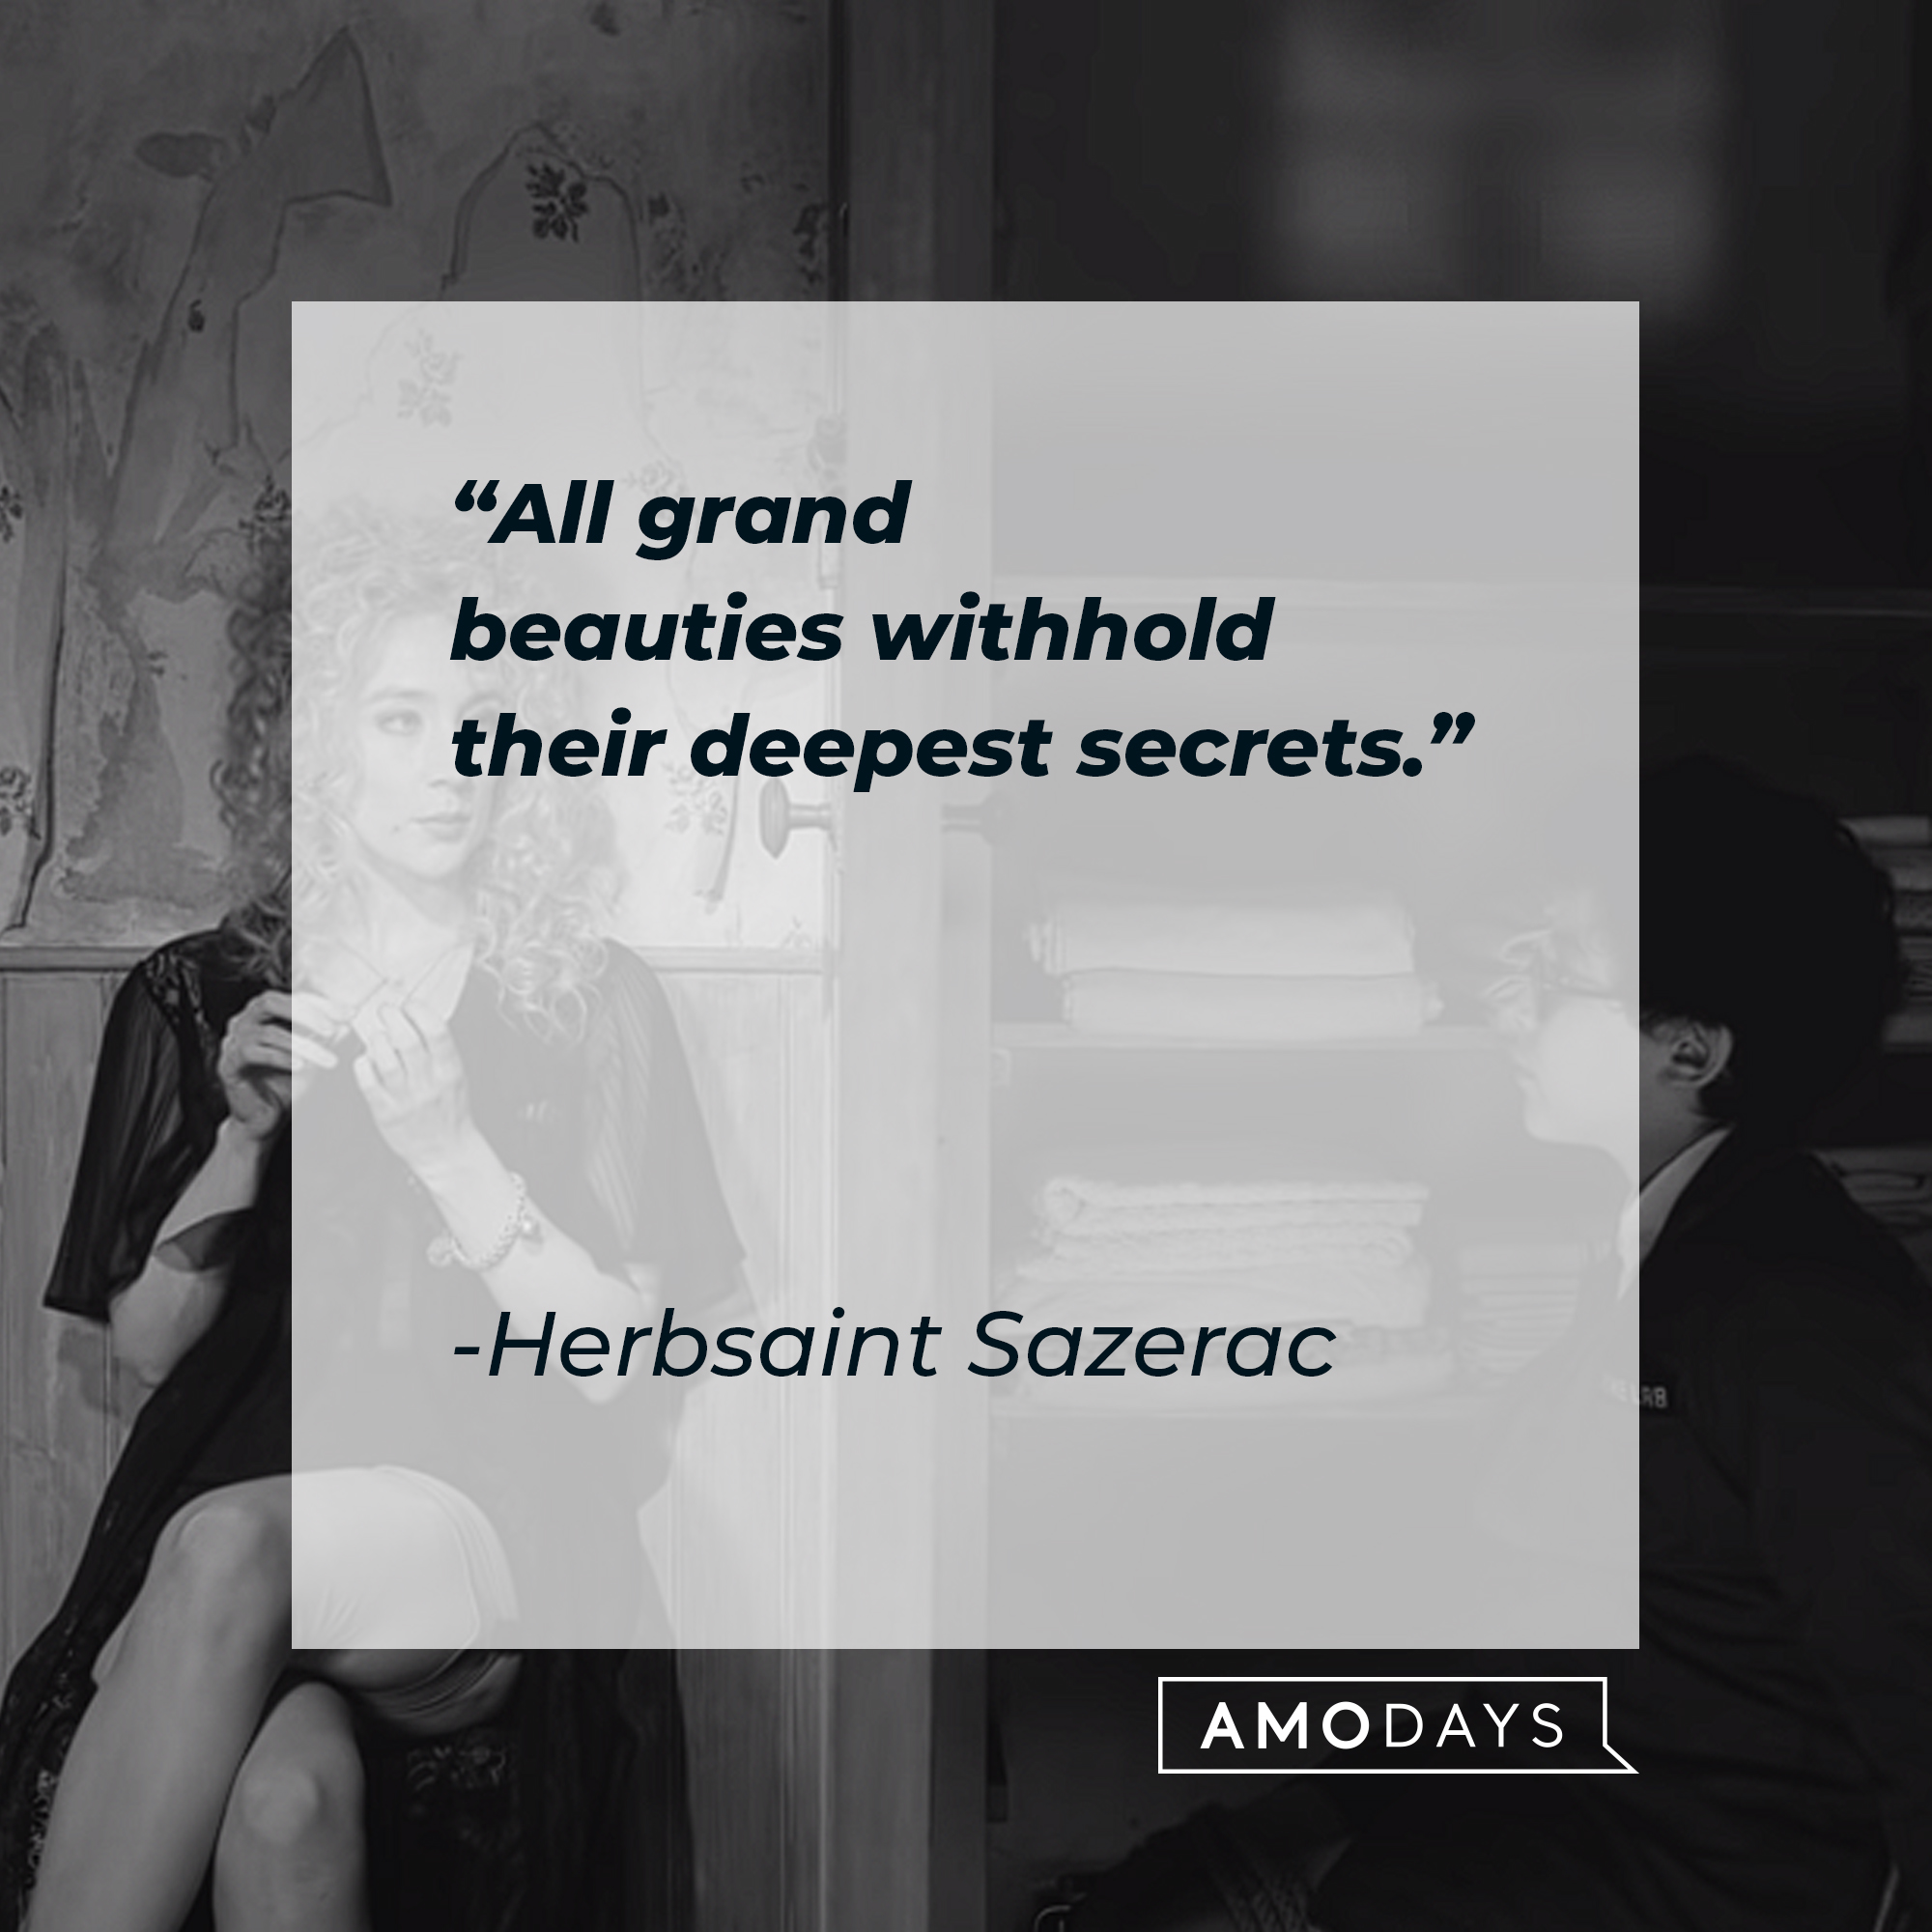 Herbsaint Sazerac's quote: "All grand beauties withhold their deepest secrets." | Source: youtube.com/searchlightpictures